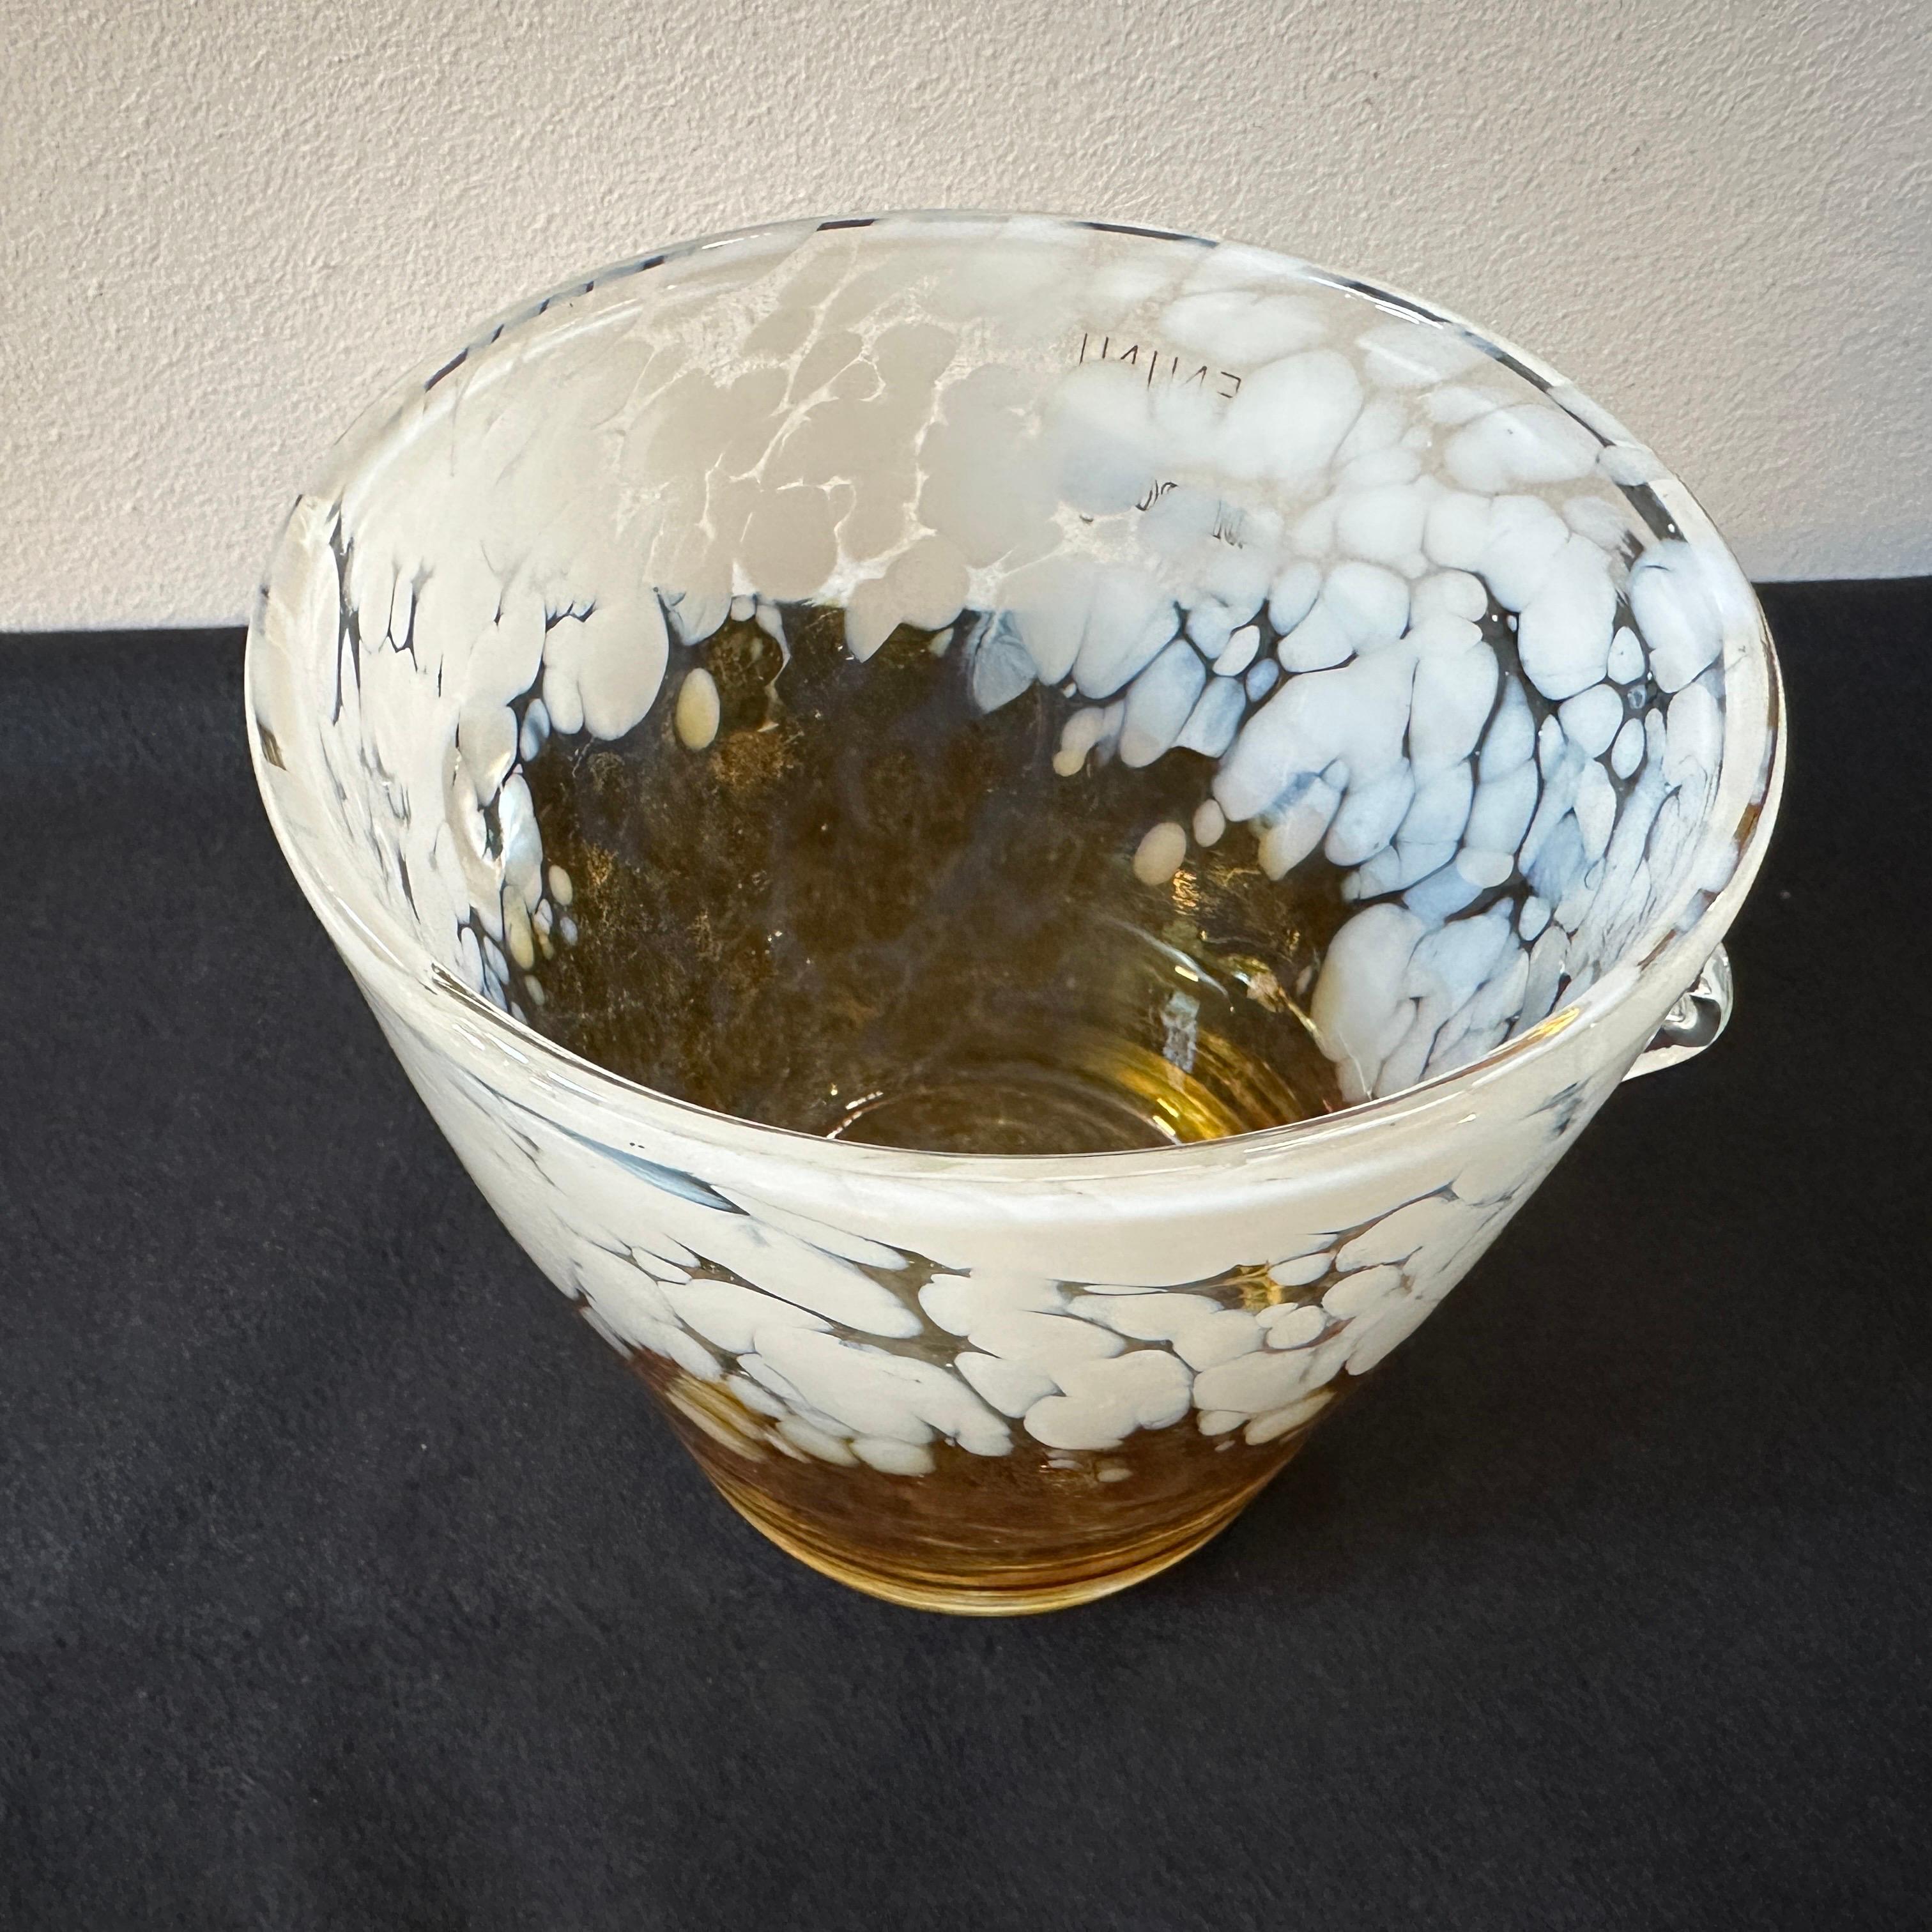 1980s Modernist Yellow and White Murano Glass Ice Bucket by Venini For Sale 2